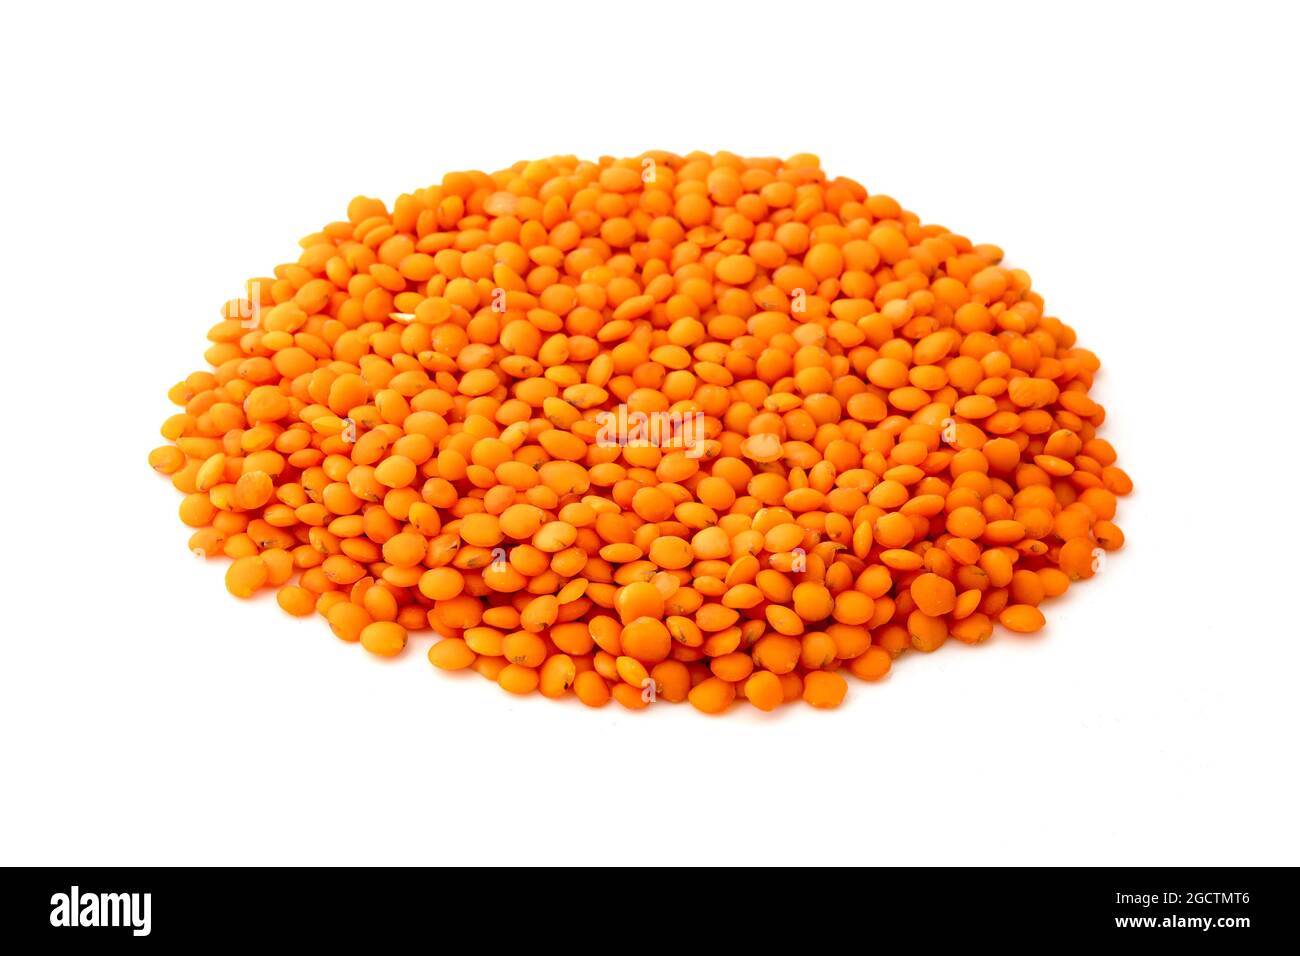 Red Lentils on a white background Stock Photo